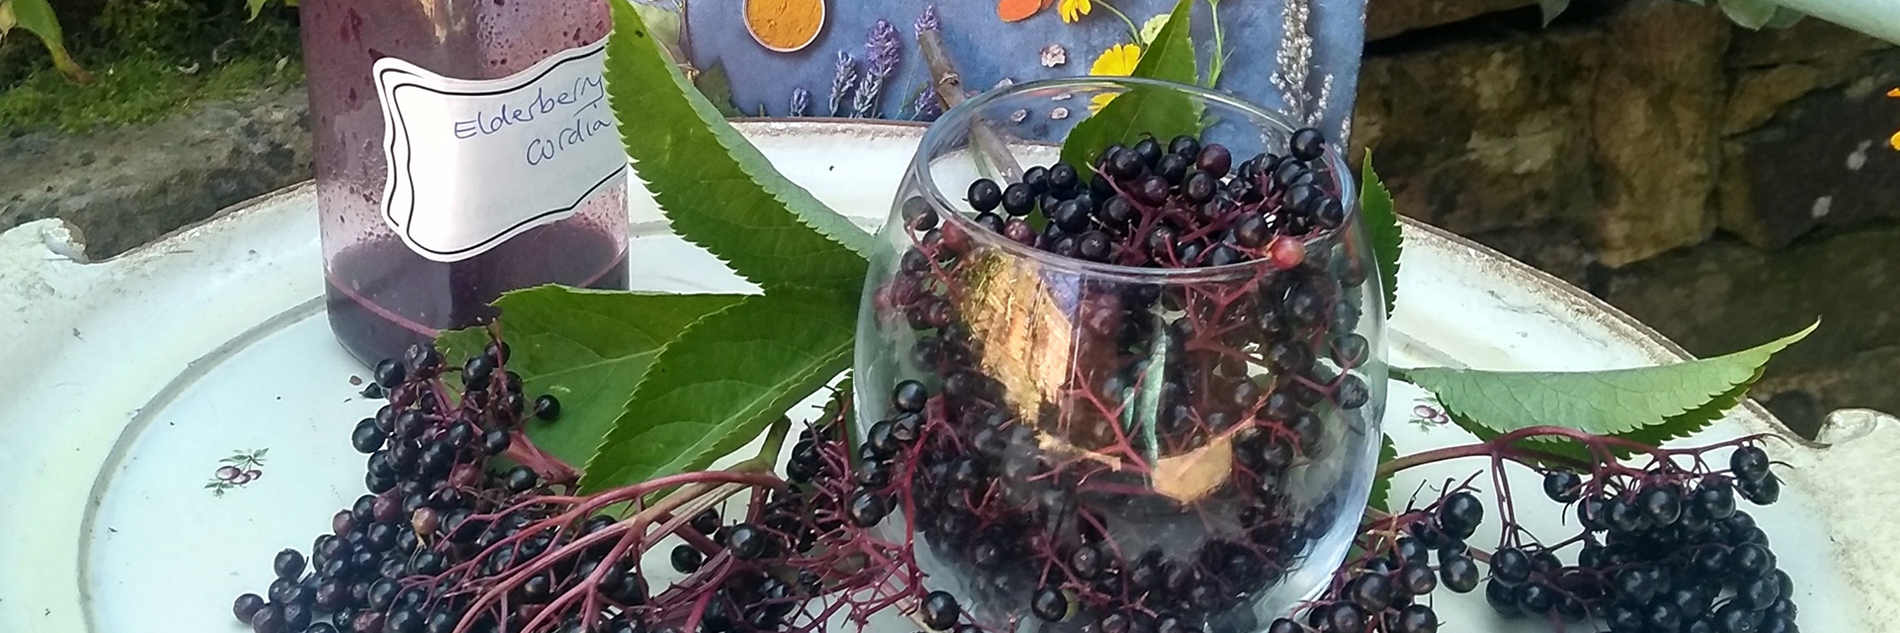 Elderflower berries, leaves and cordial on a large ceramic plate in front of a weathered brick wall. Behind the plate there is a small purple display board with various flower and leaf cuttings.  